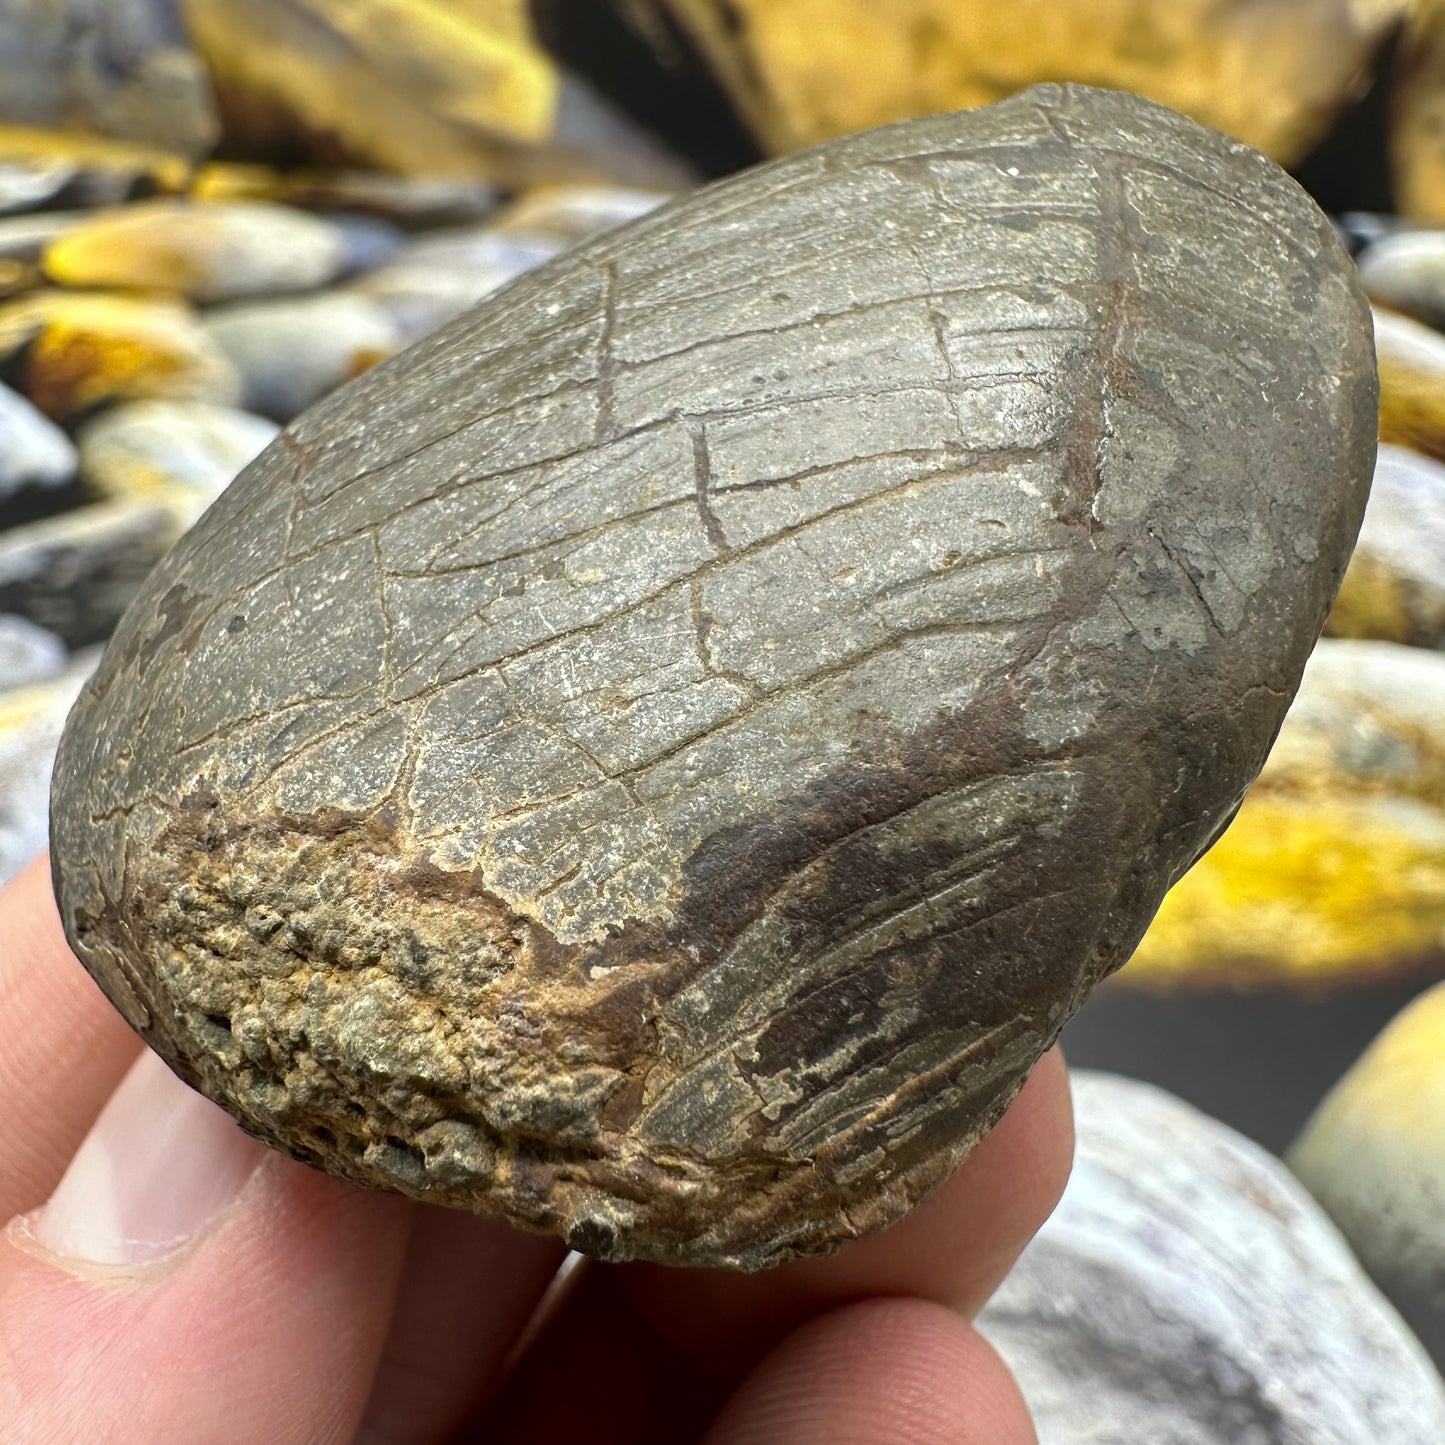 Shell fossil - Whitby, North Yorkshire